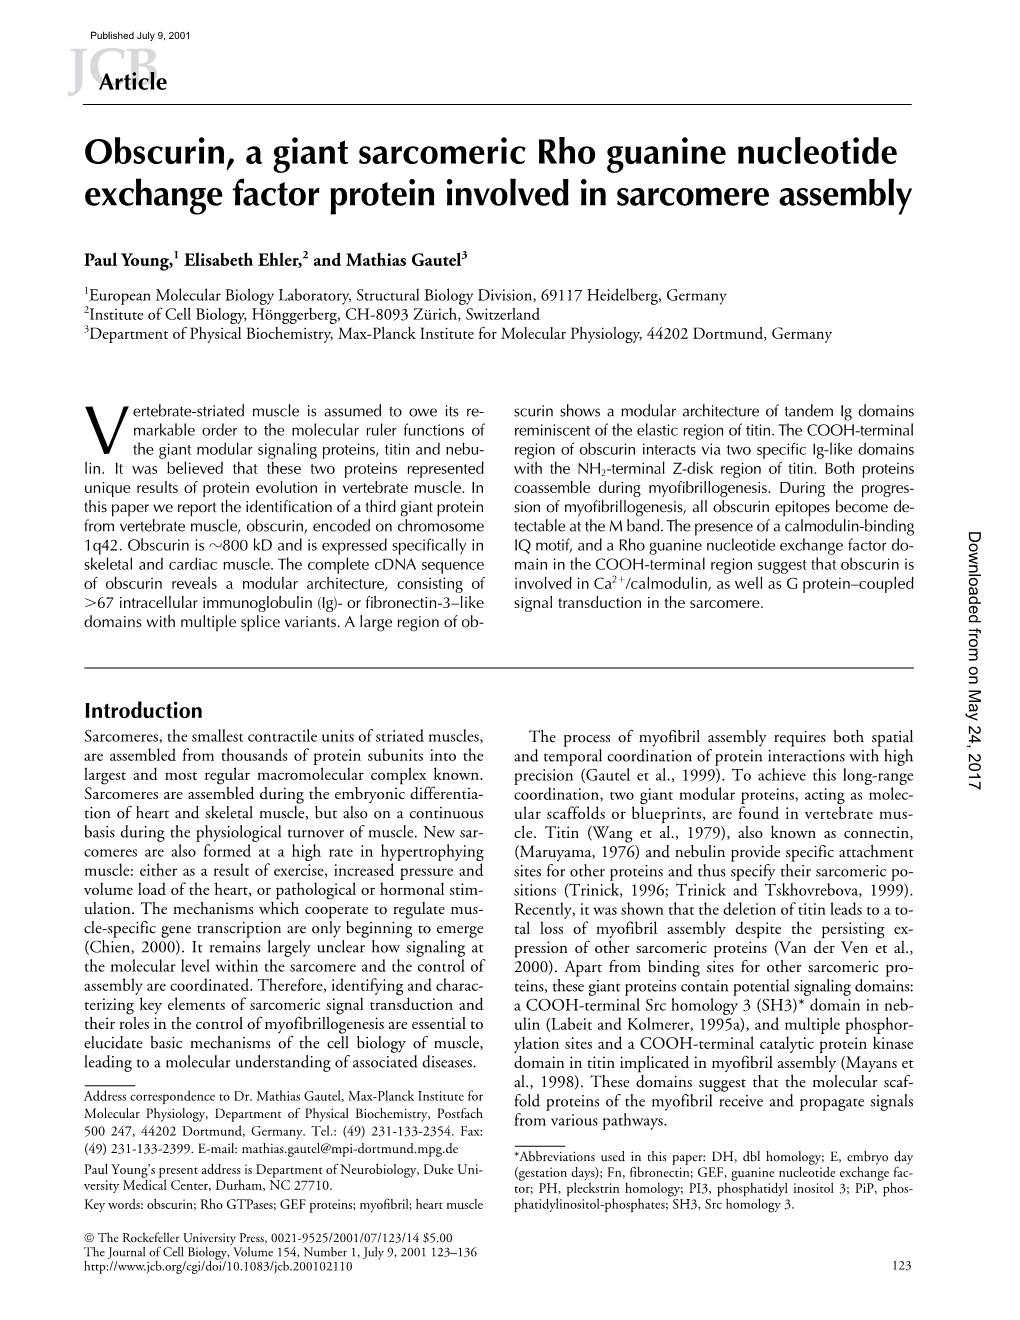 Obscurin, a Giant Sarcomeric Rho Guanine Nucleotide Exchange Factor Protein Involved in Sarcomere Assembly